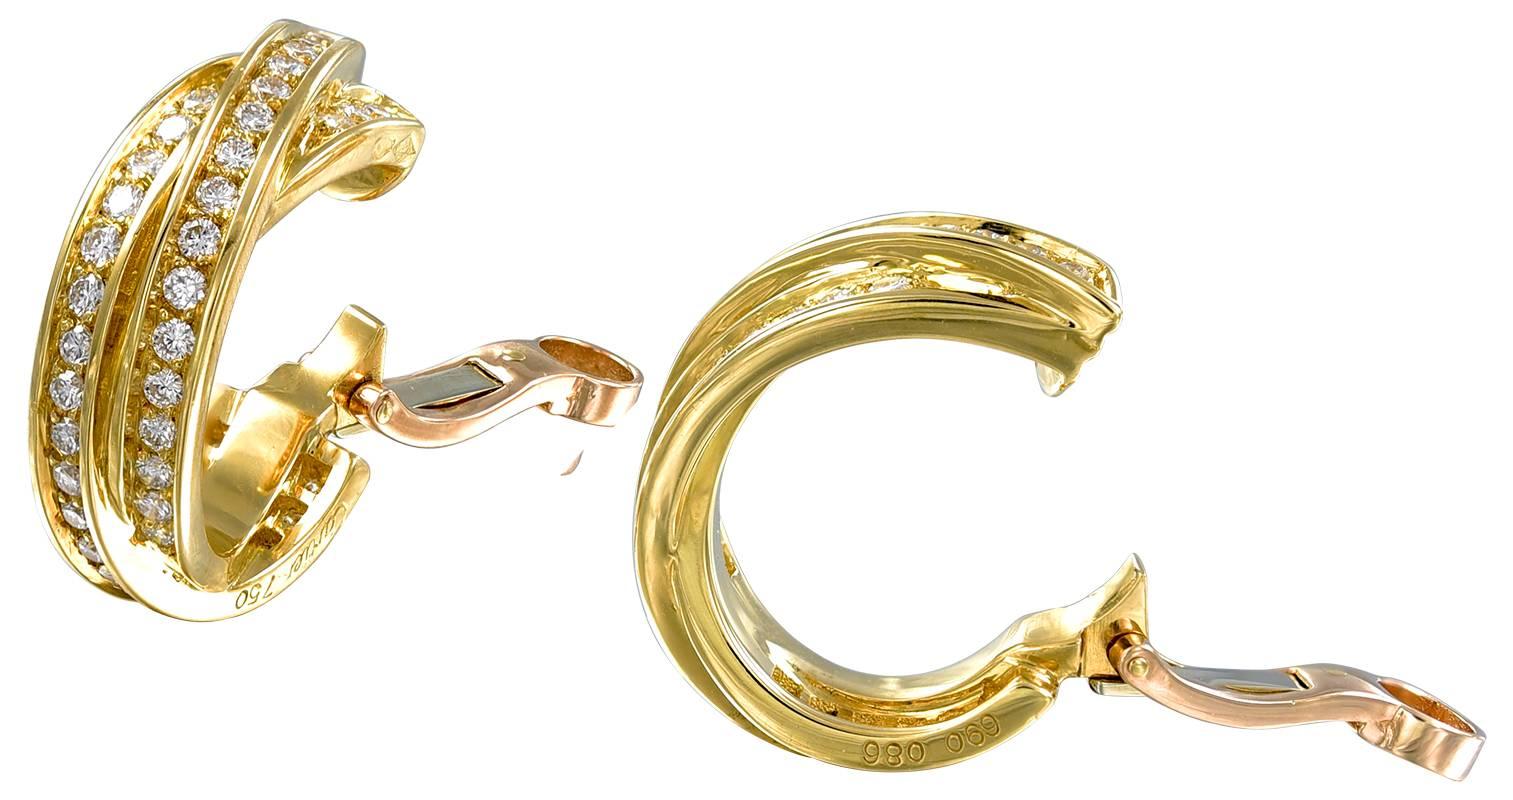 Classic elegant "Trinity" earrings.  Made, signed and numbered by CARTIER France.  18K yellow gold, encrusted with approximately 2.75 cts. of brilliant white diamonds.  3/4" in diameter.  The perfect day to night earring.

Alice